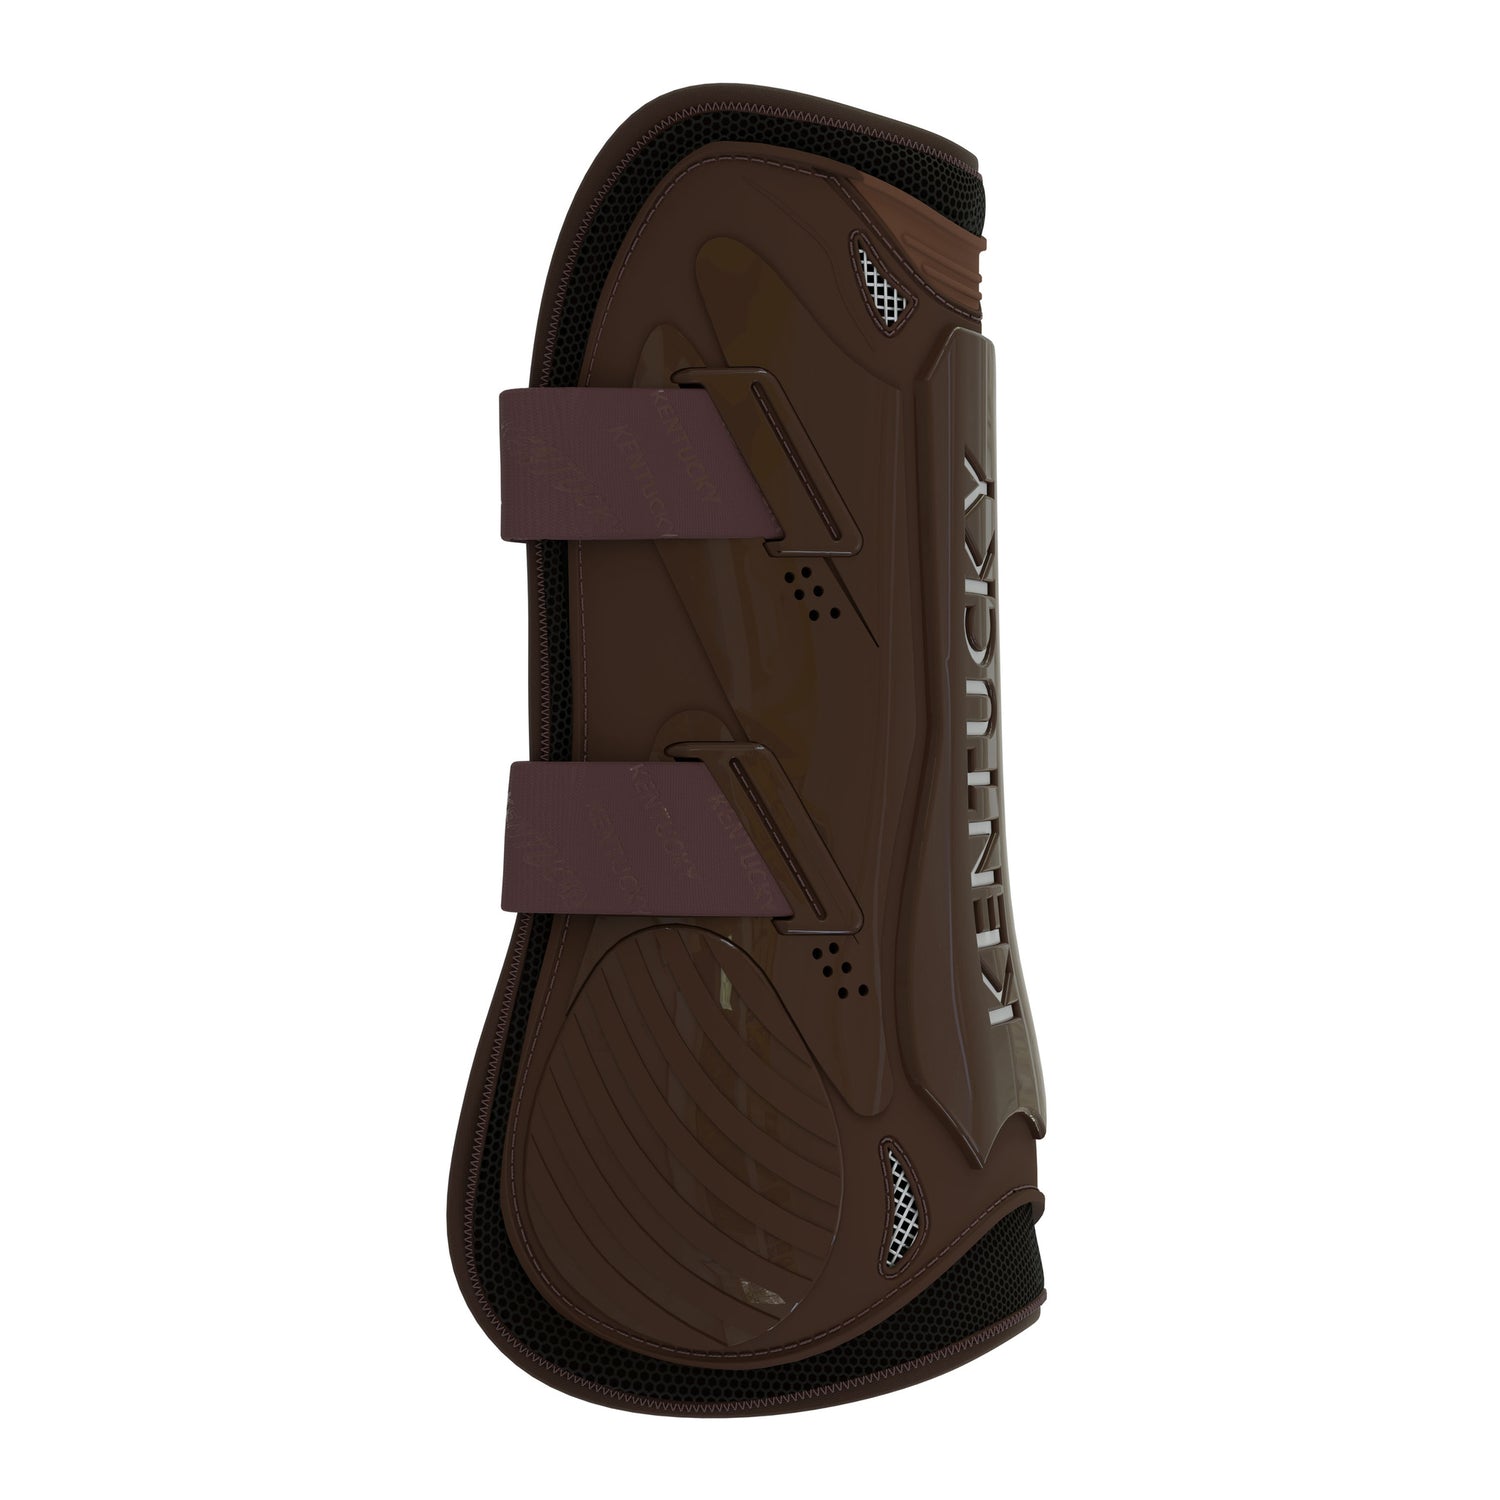 Kentucky Vegan Sheepskin Tendon Boots Bamboo Shield with Elastic fastenings are now available following years of research and development. The Kentucky Bamboo Sheild Supersedes the already very popular Kentucky Sheepskin Tendon Boot.  The new advanced Technology Bamboo Shield provides the ultimate protection to the tendon area, if your horse should over reach higher up the leg.